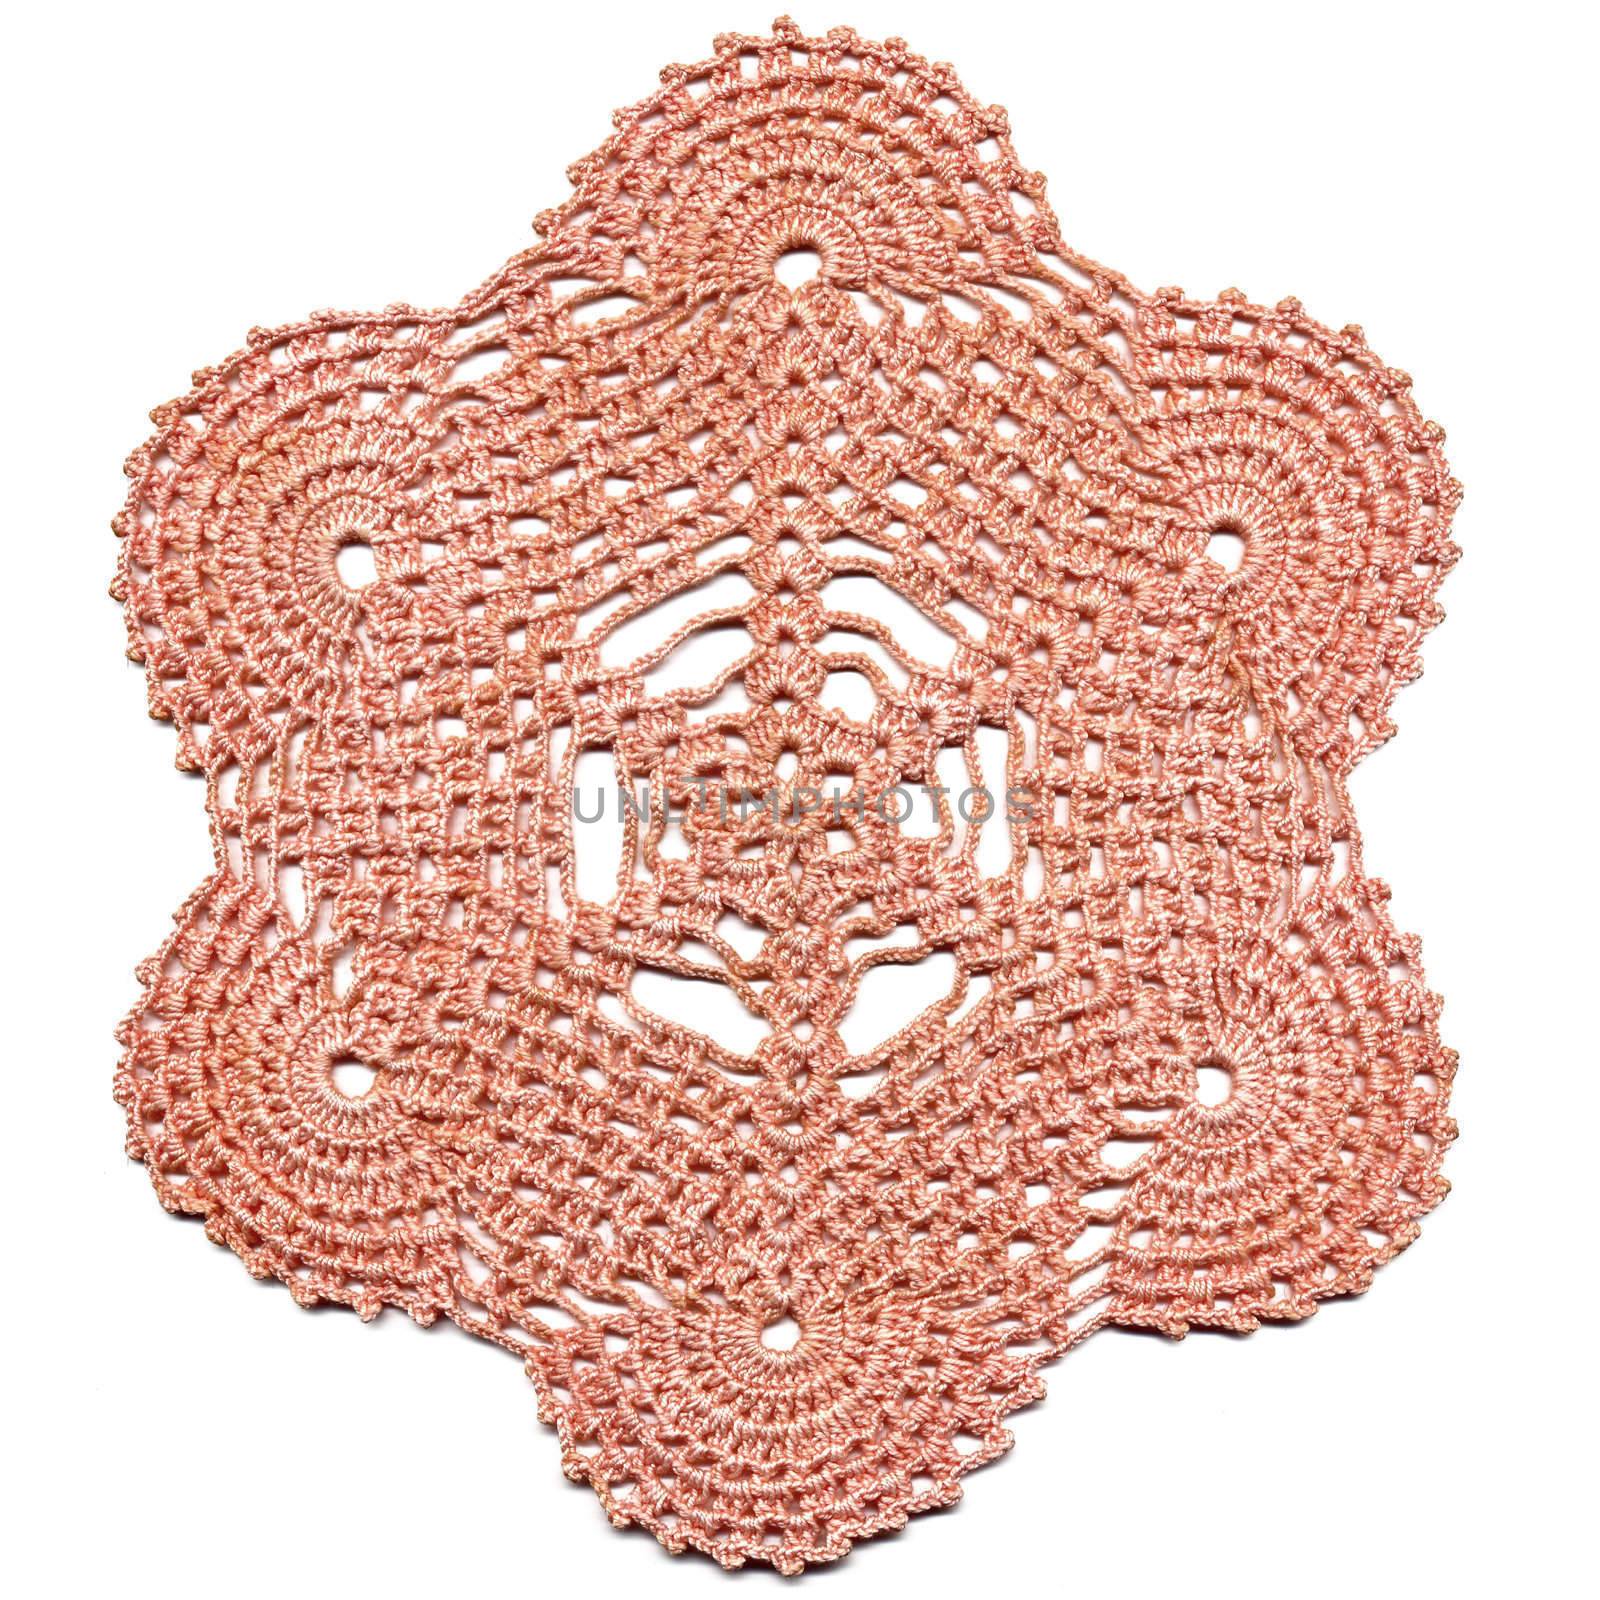 Hand made crocheted doily by homydesign